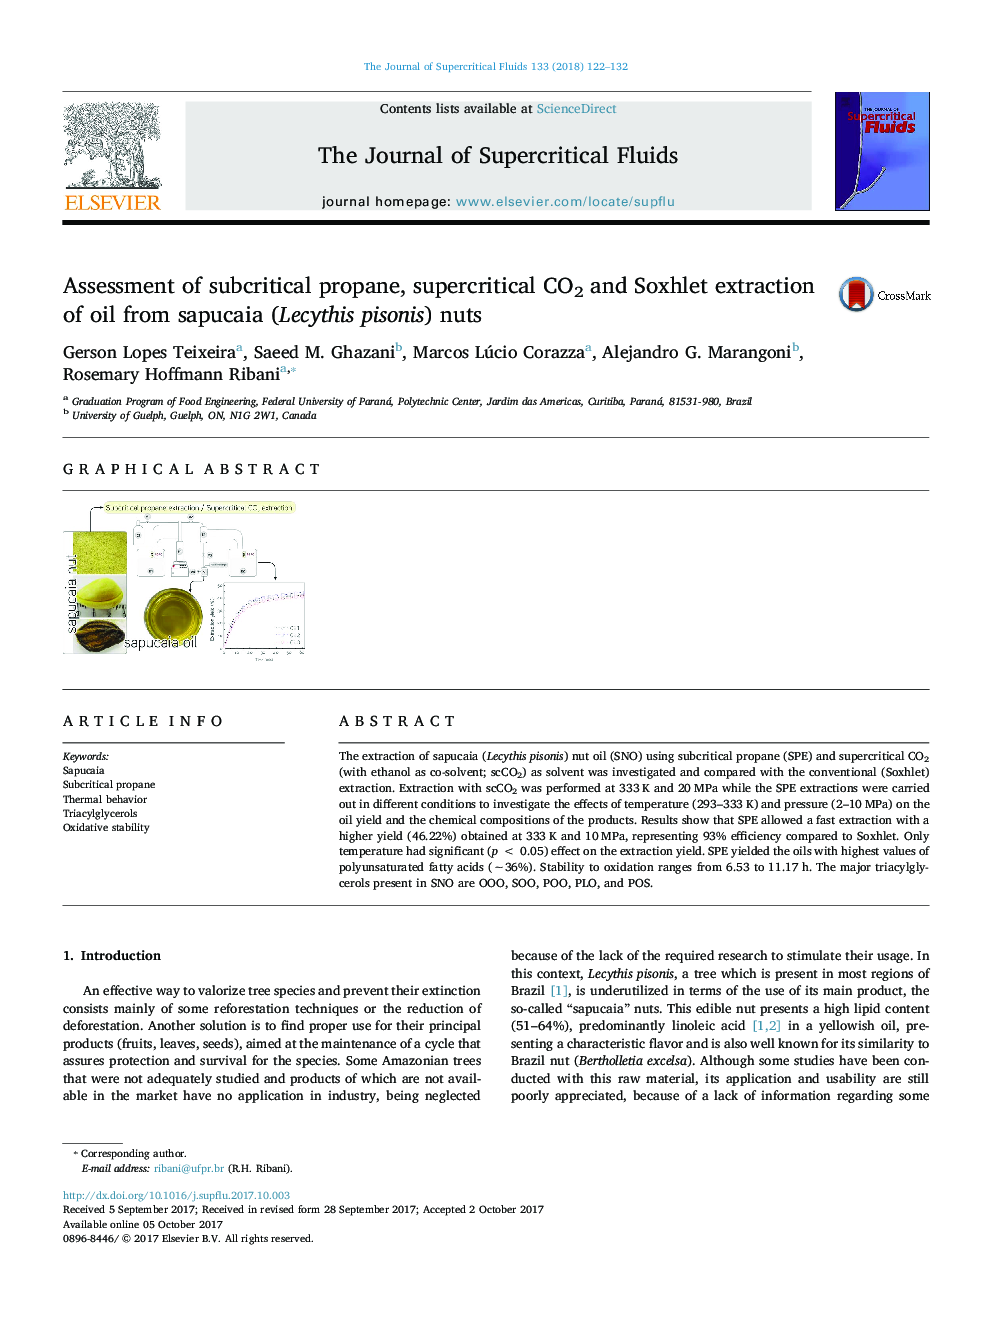 Assessment of subcritical propane, supercritical CO2 and Soxhlet extraction of oil from sapucaia (Lecythis pisonis) nuts